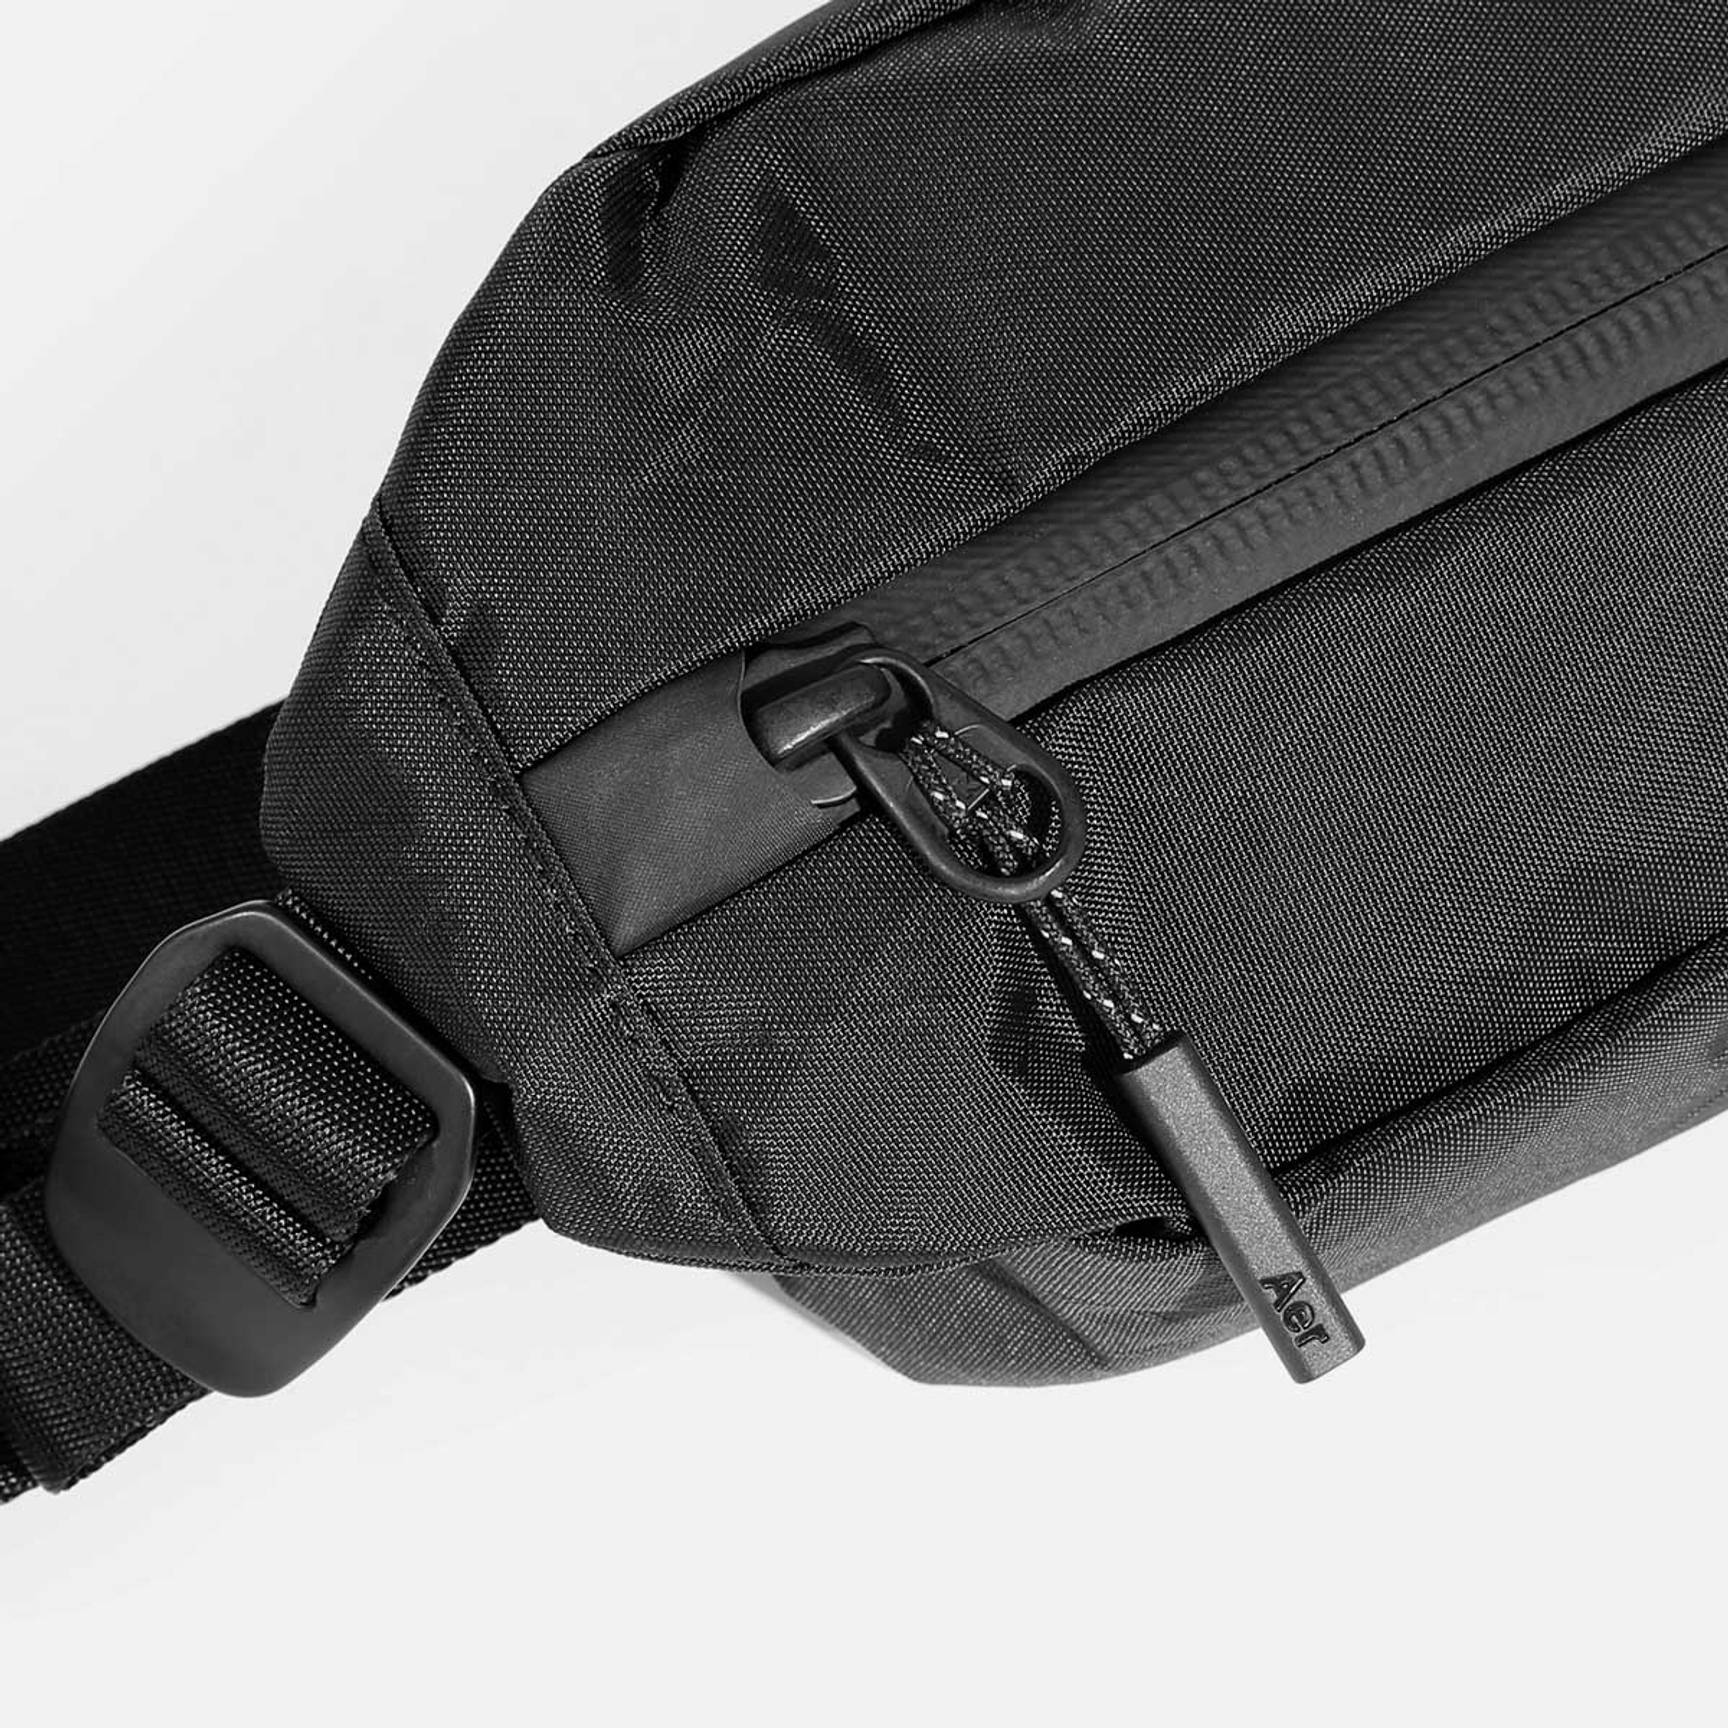 Aer City Sling 2 Review